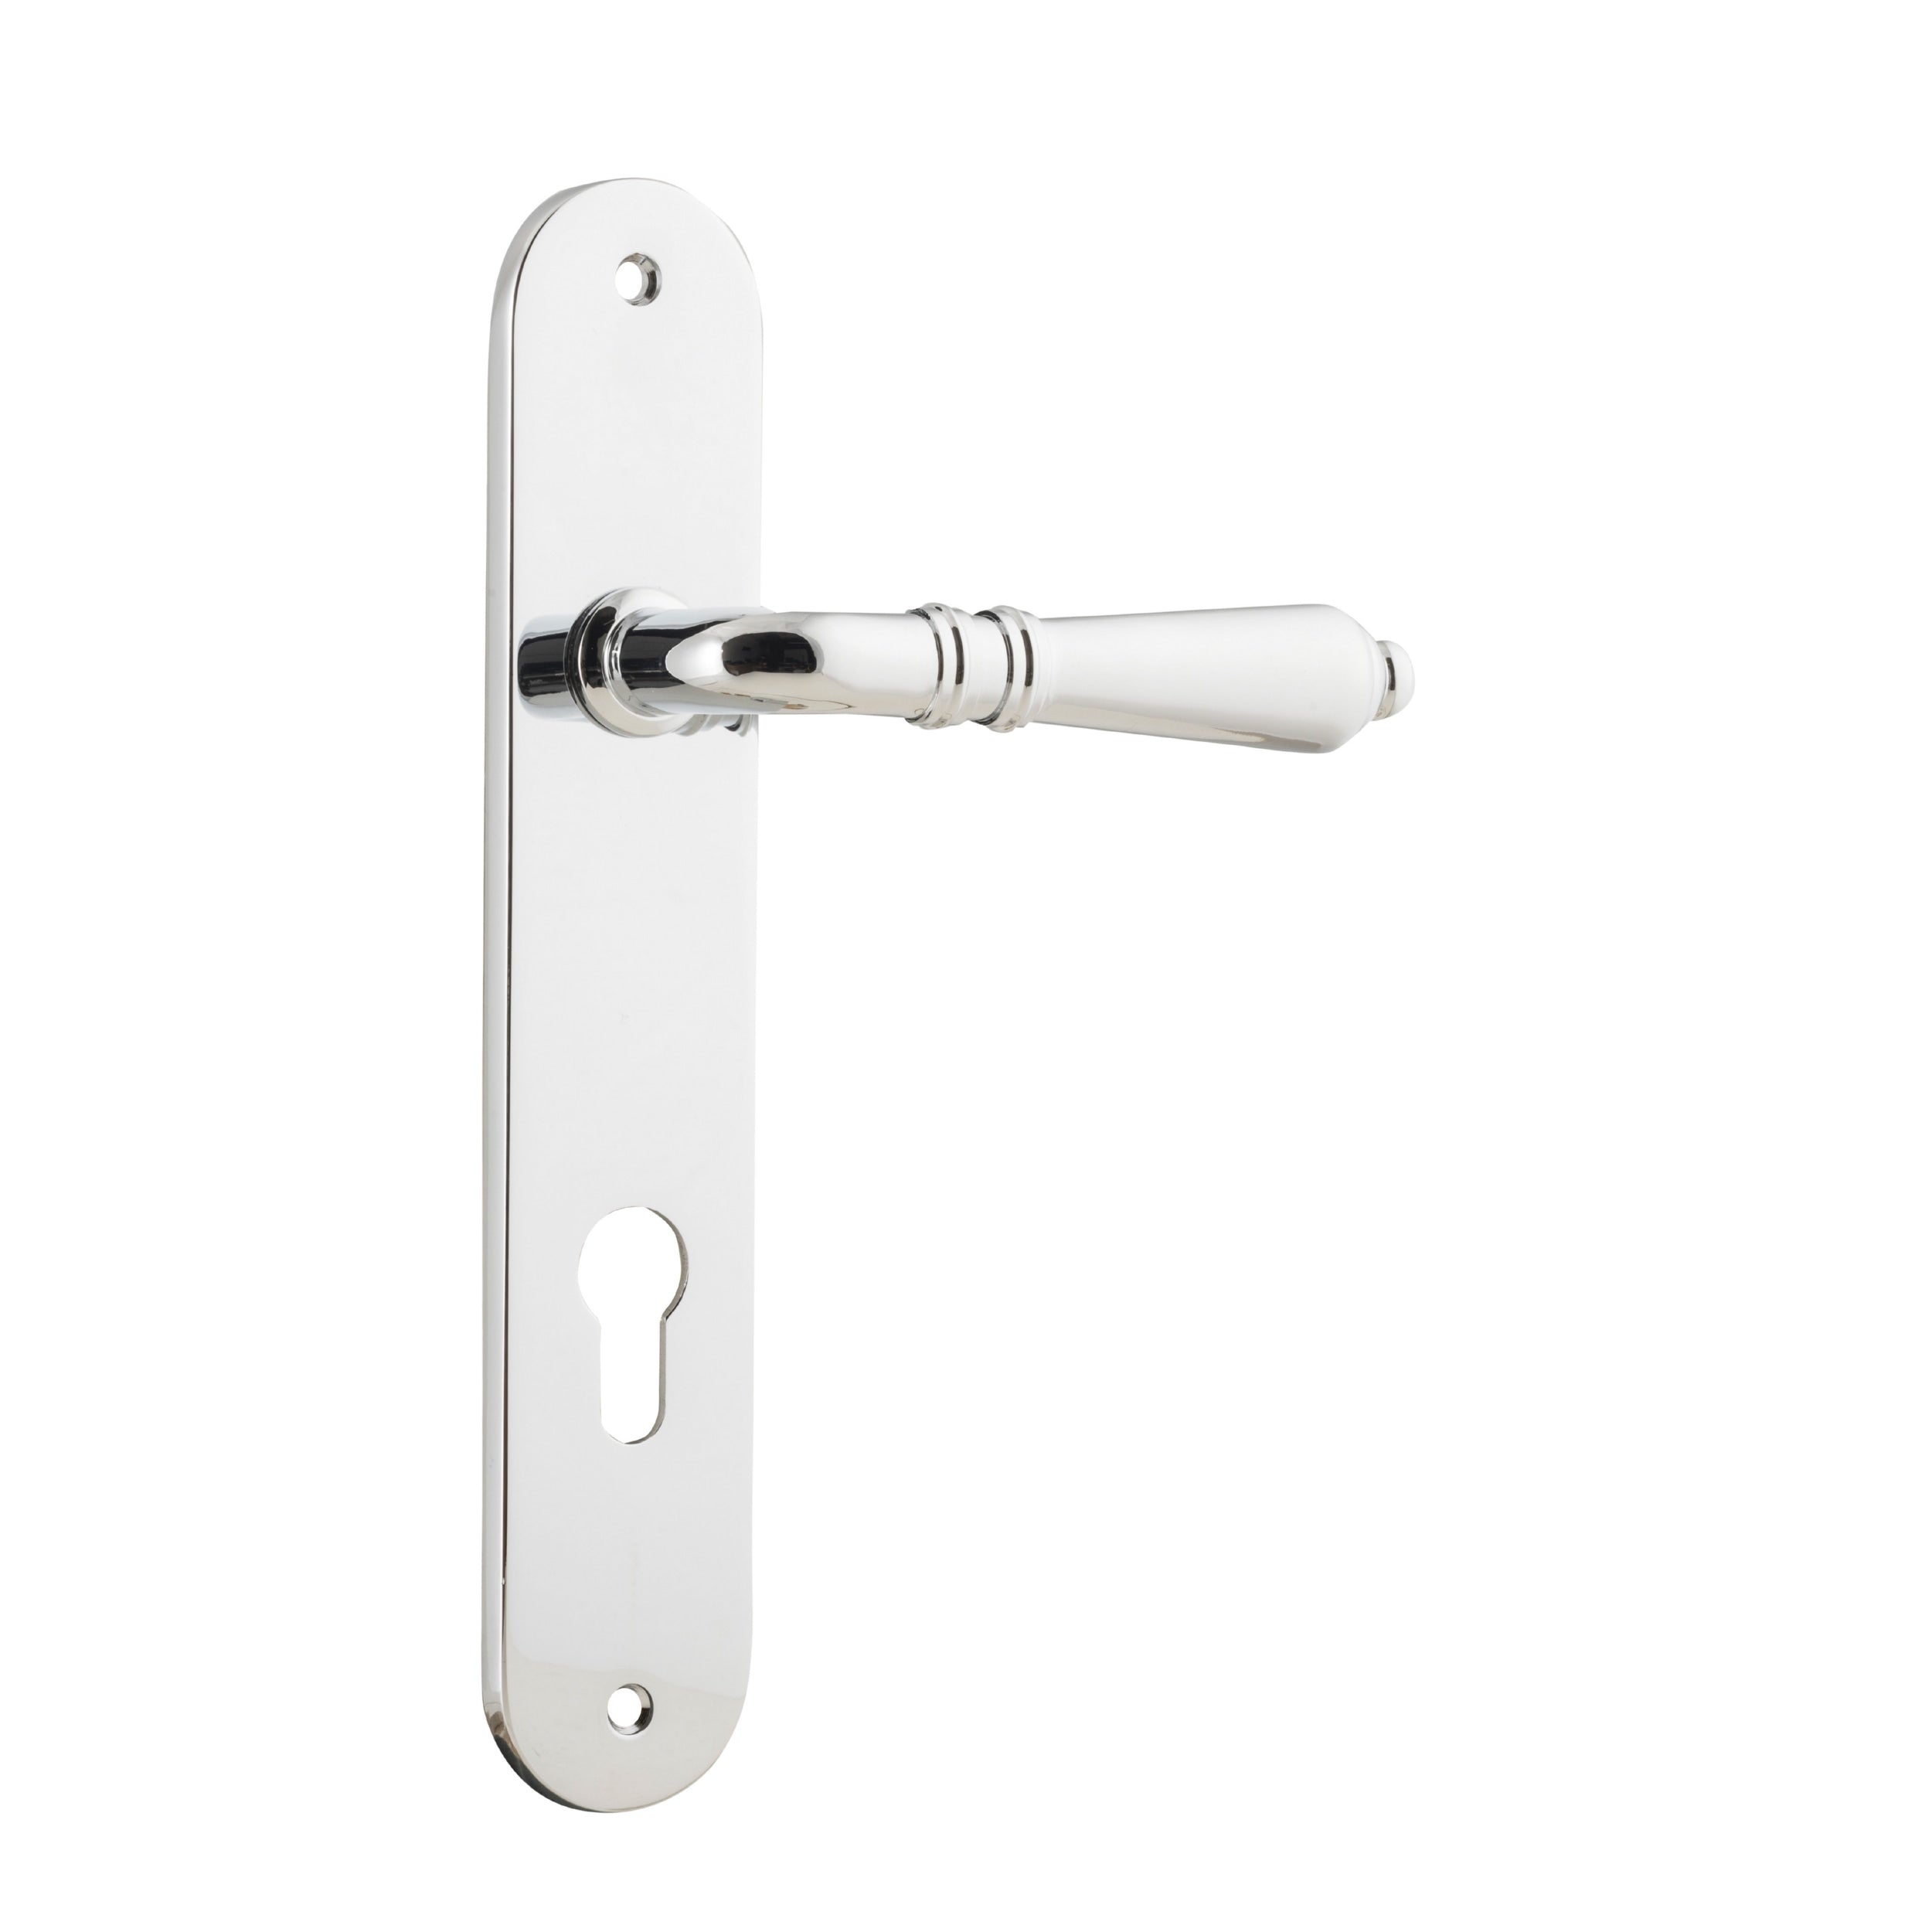 Iver Door Handle Sarlat Oval Euro Pair Polished Chrome